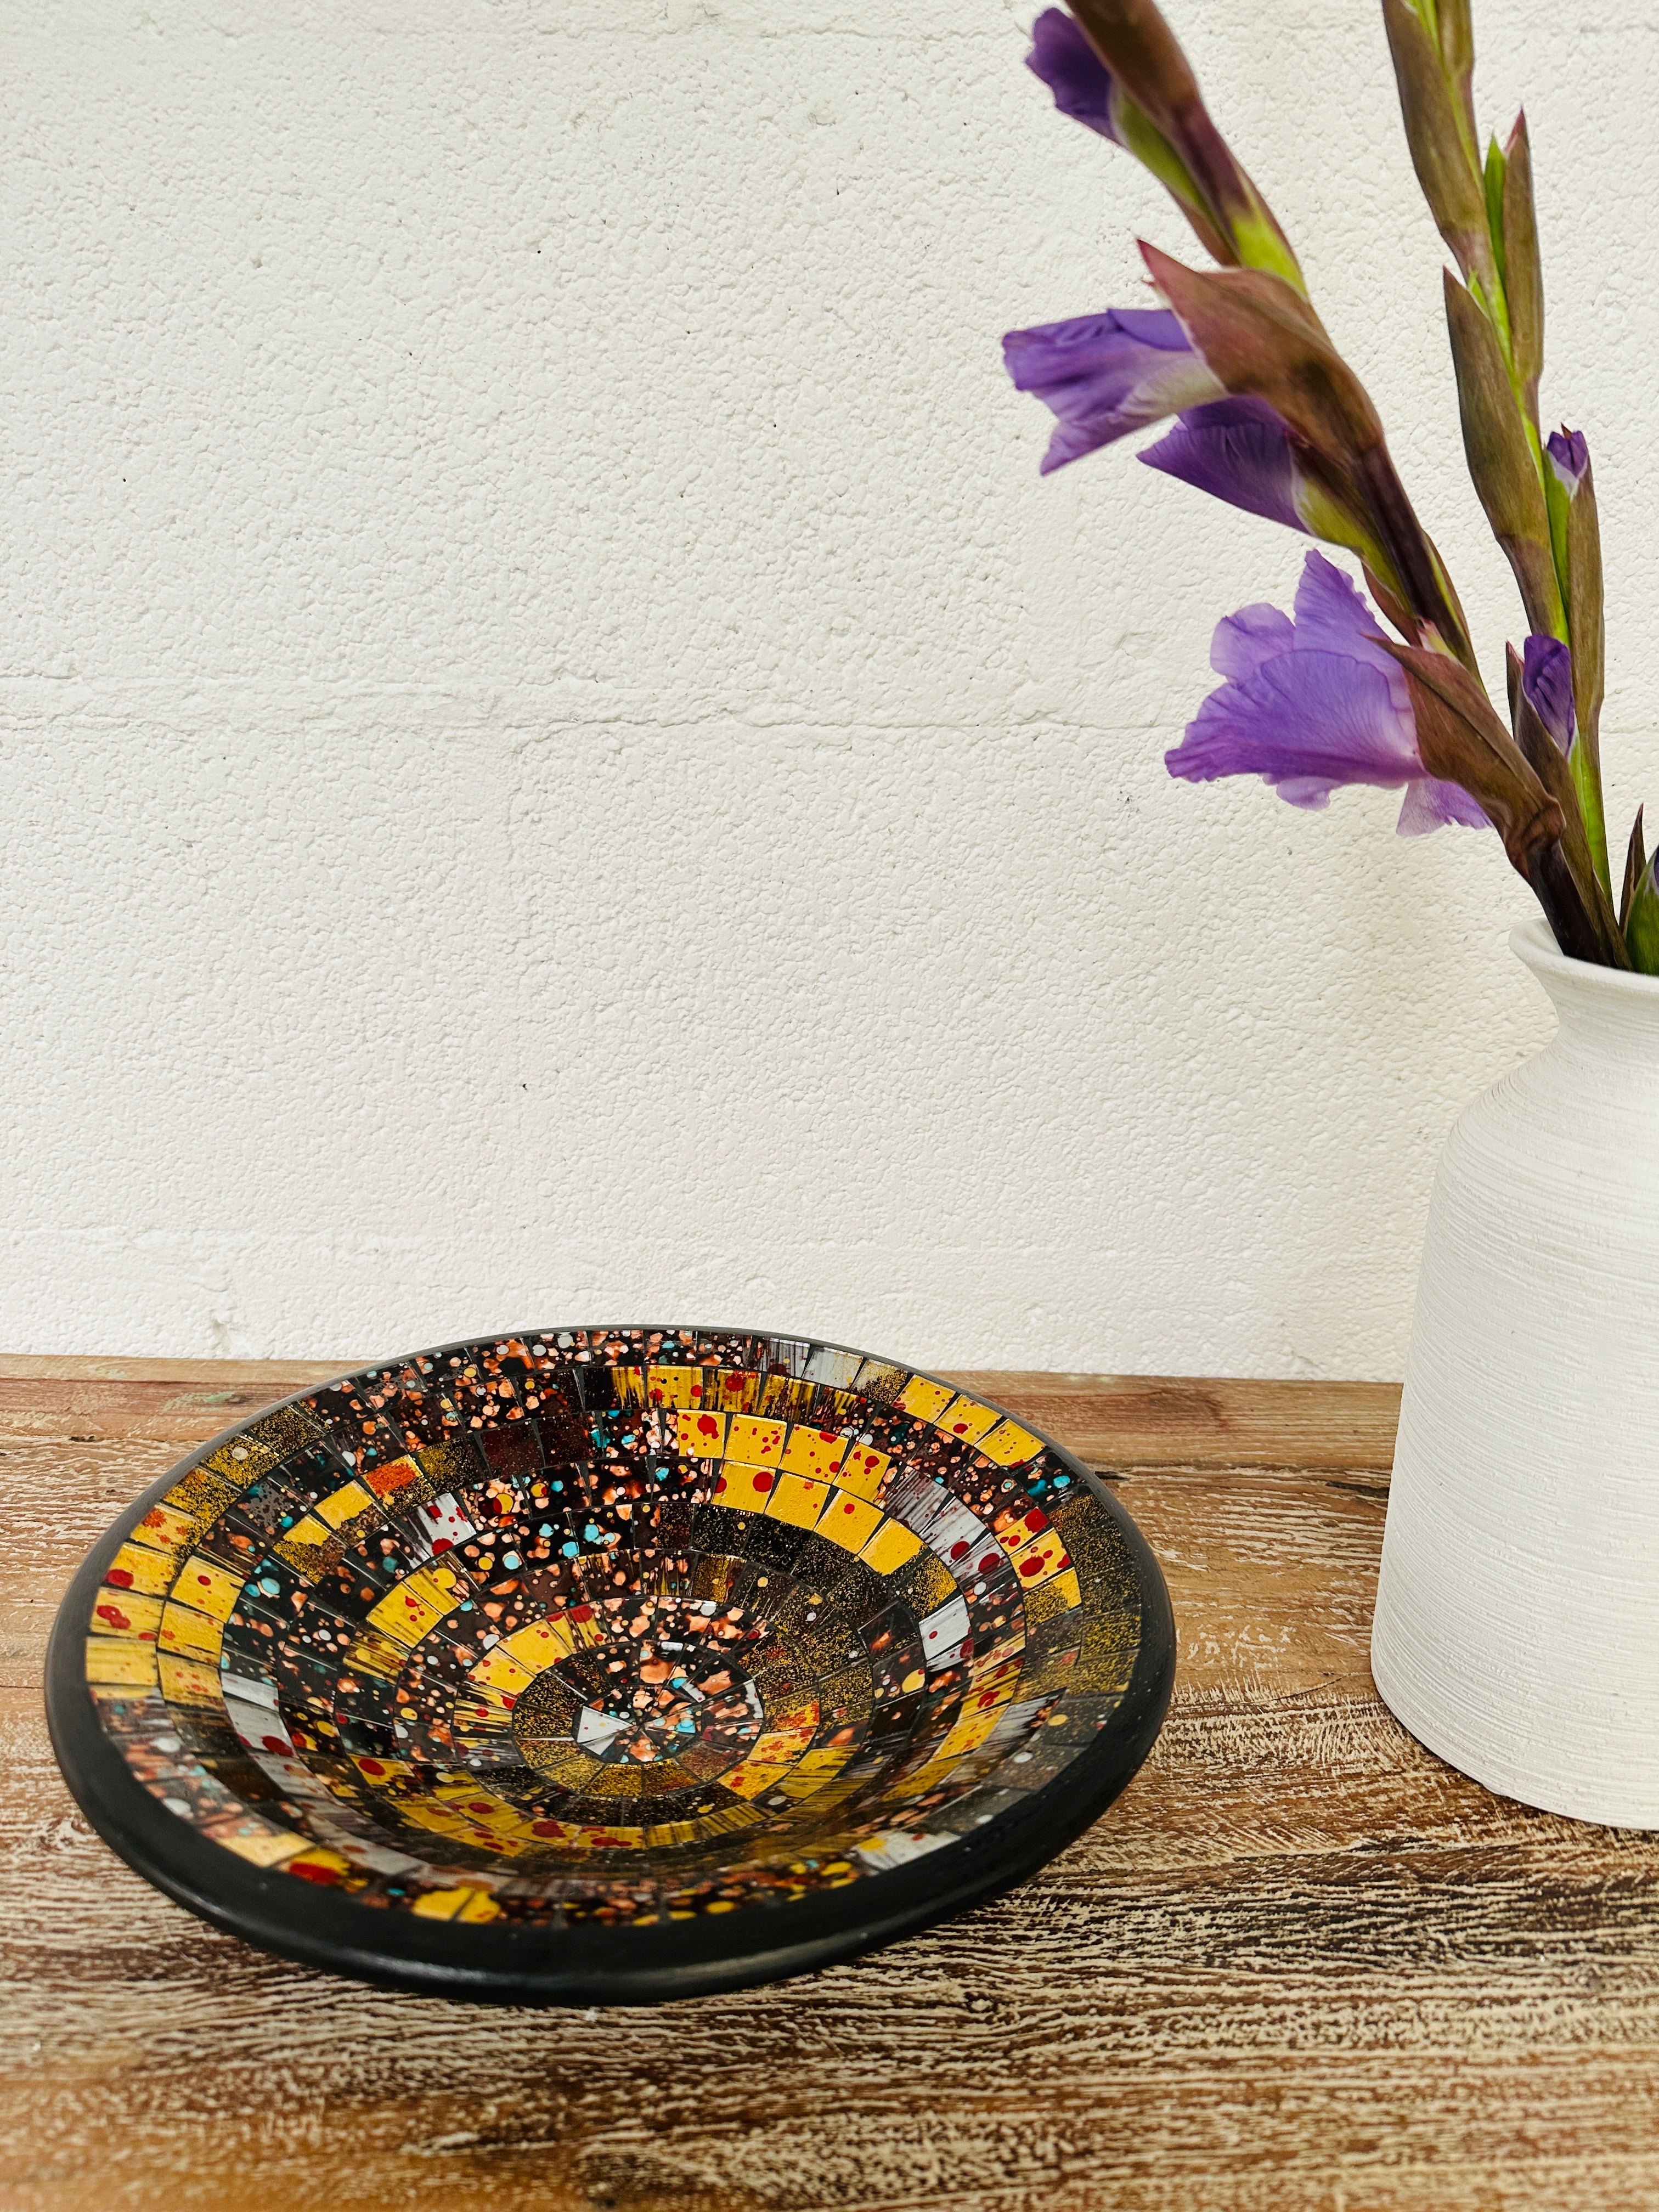 display view of mosaic bowl next to a vase of flowers on a table